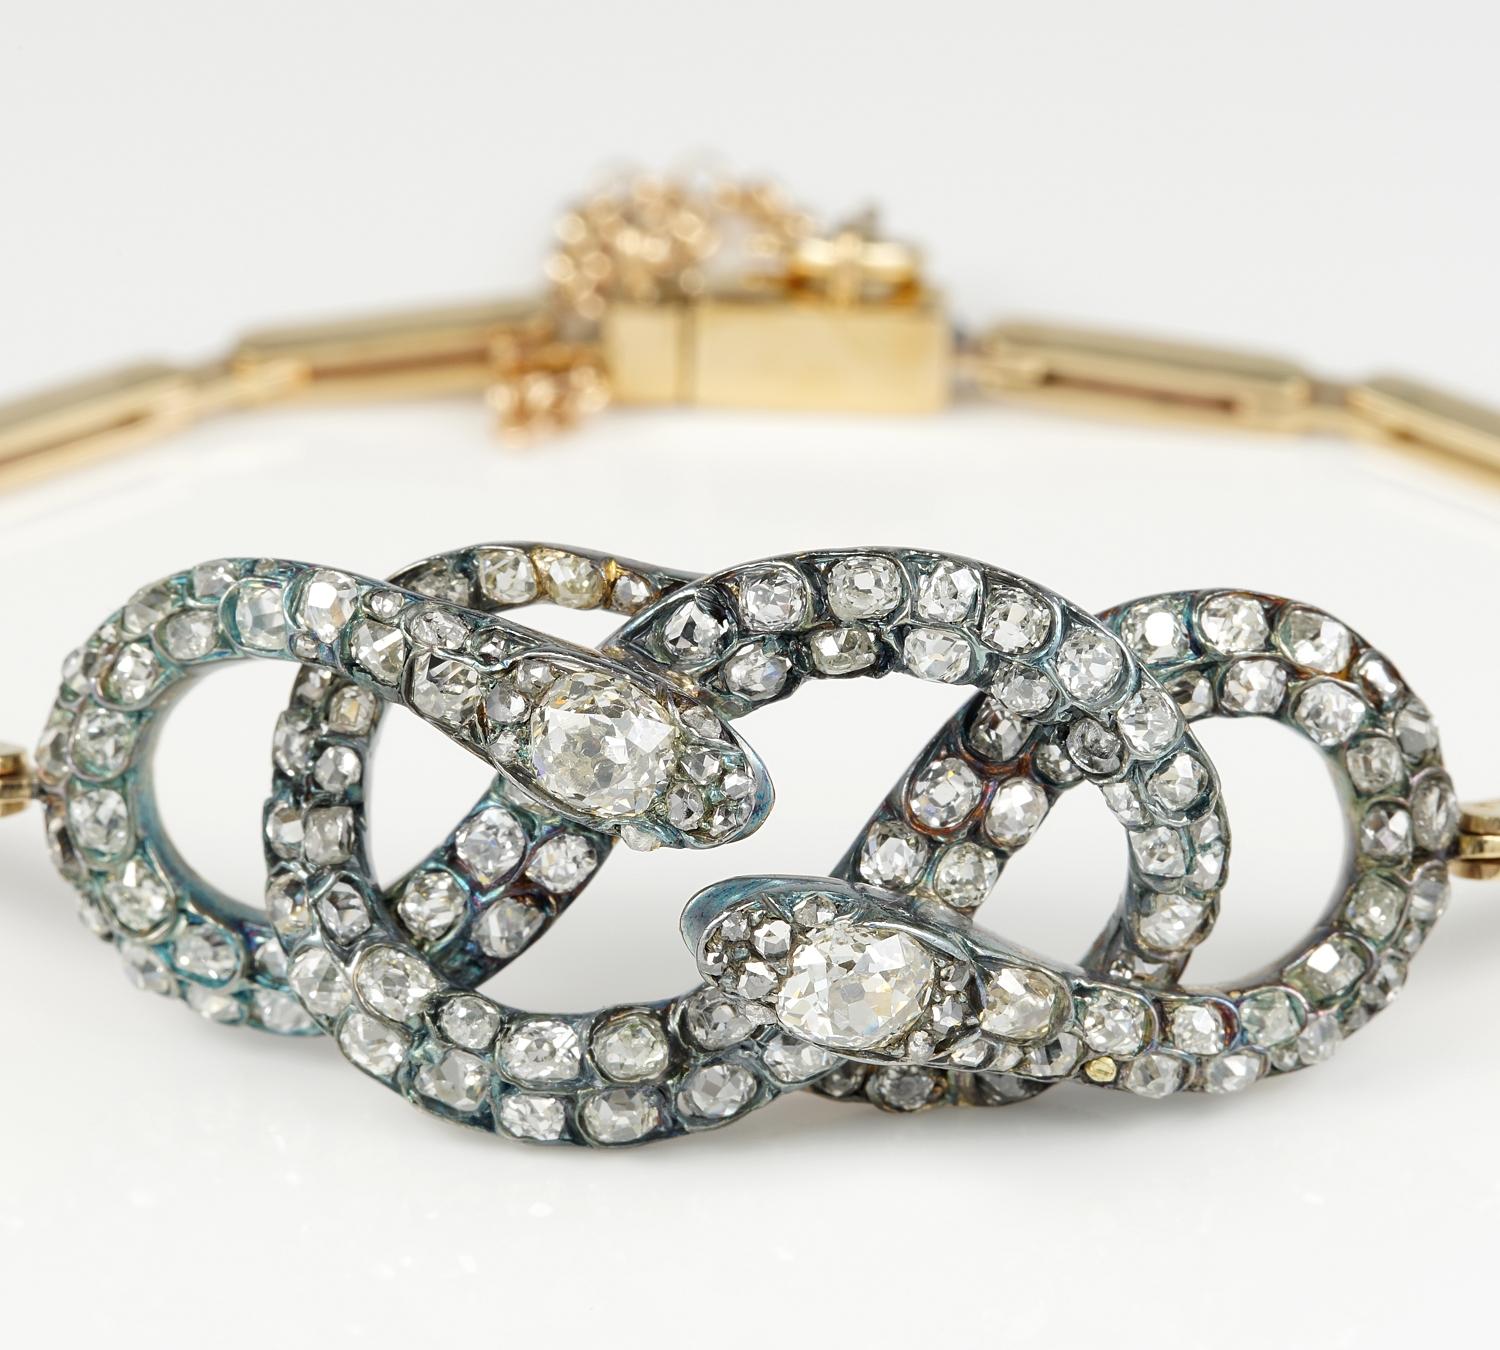 Symbolic Snakes
This extremely beautiful, rare Victorian bracelet is a joy to admire as survivor of Victorian Period jewellery
Glorious workmanship of the time, hand crafted of solid 15 Kt gold tested with silver top as used during the period
The